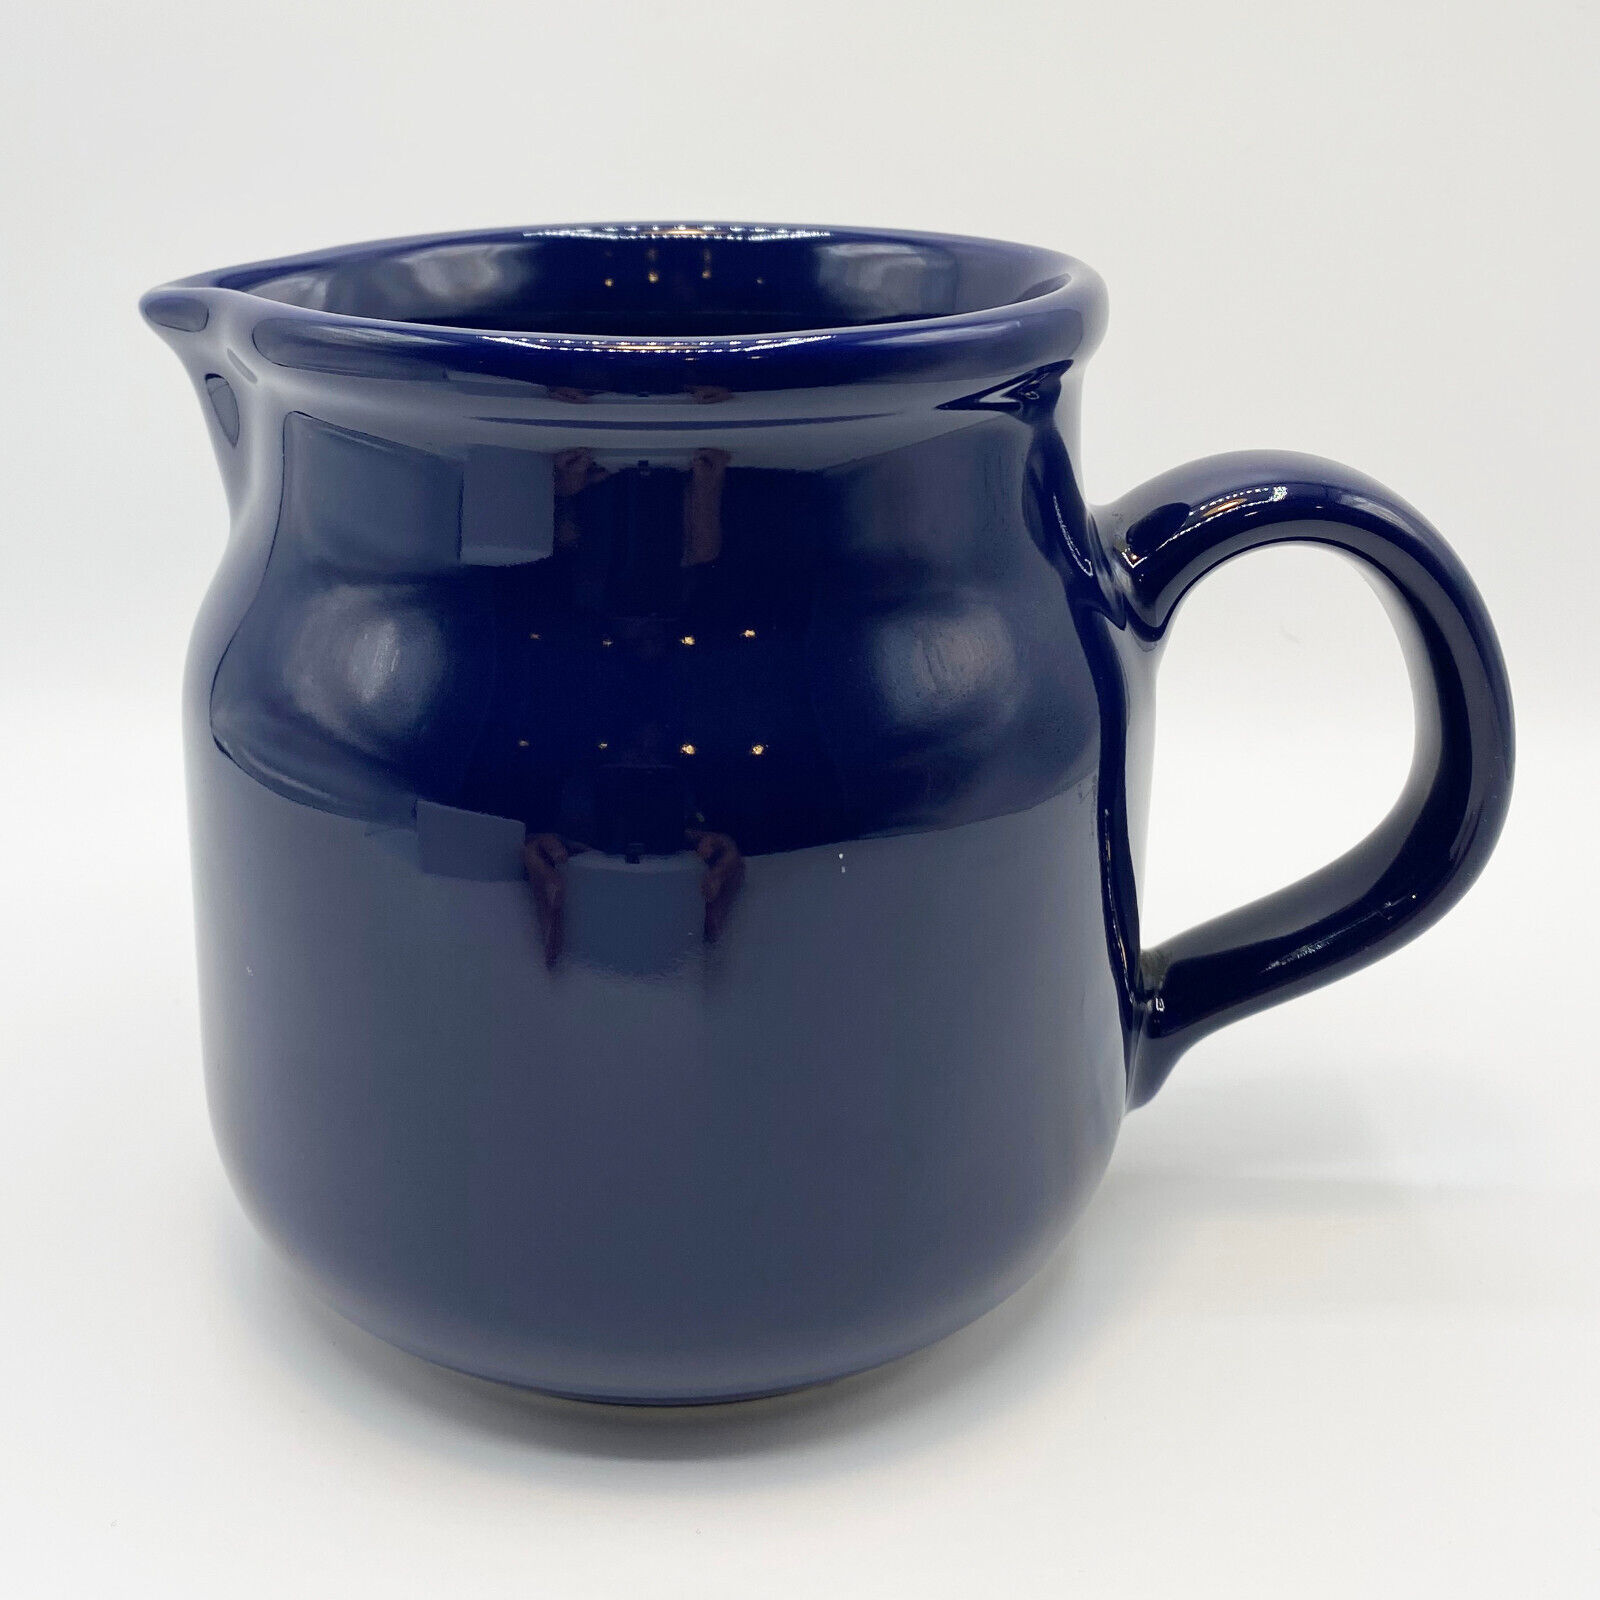 WAECHTERSBACH Vintage Pitcher with Handle in Blue Enamel Finish - Made in Spain